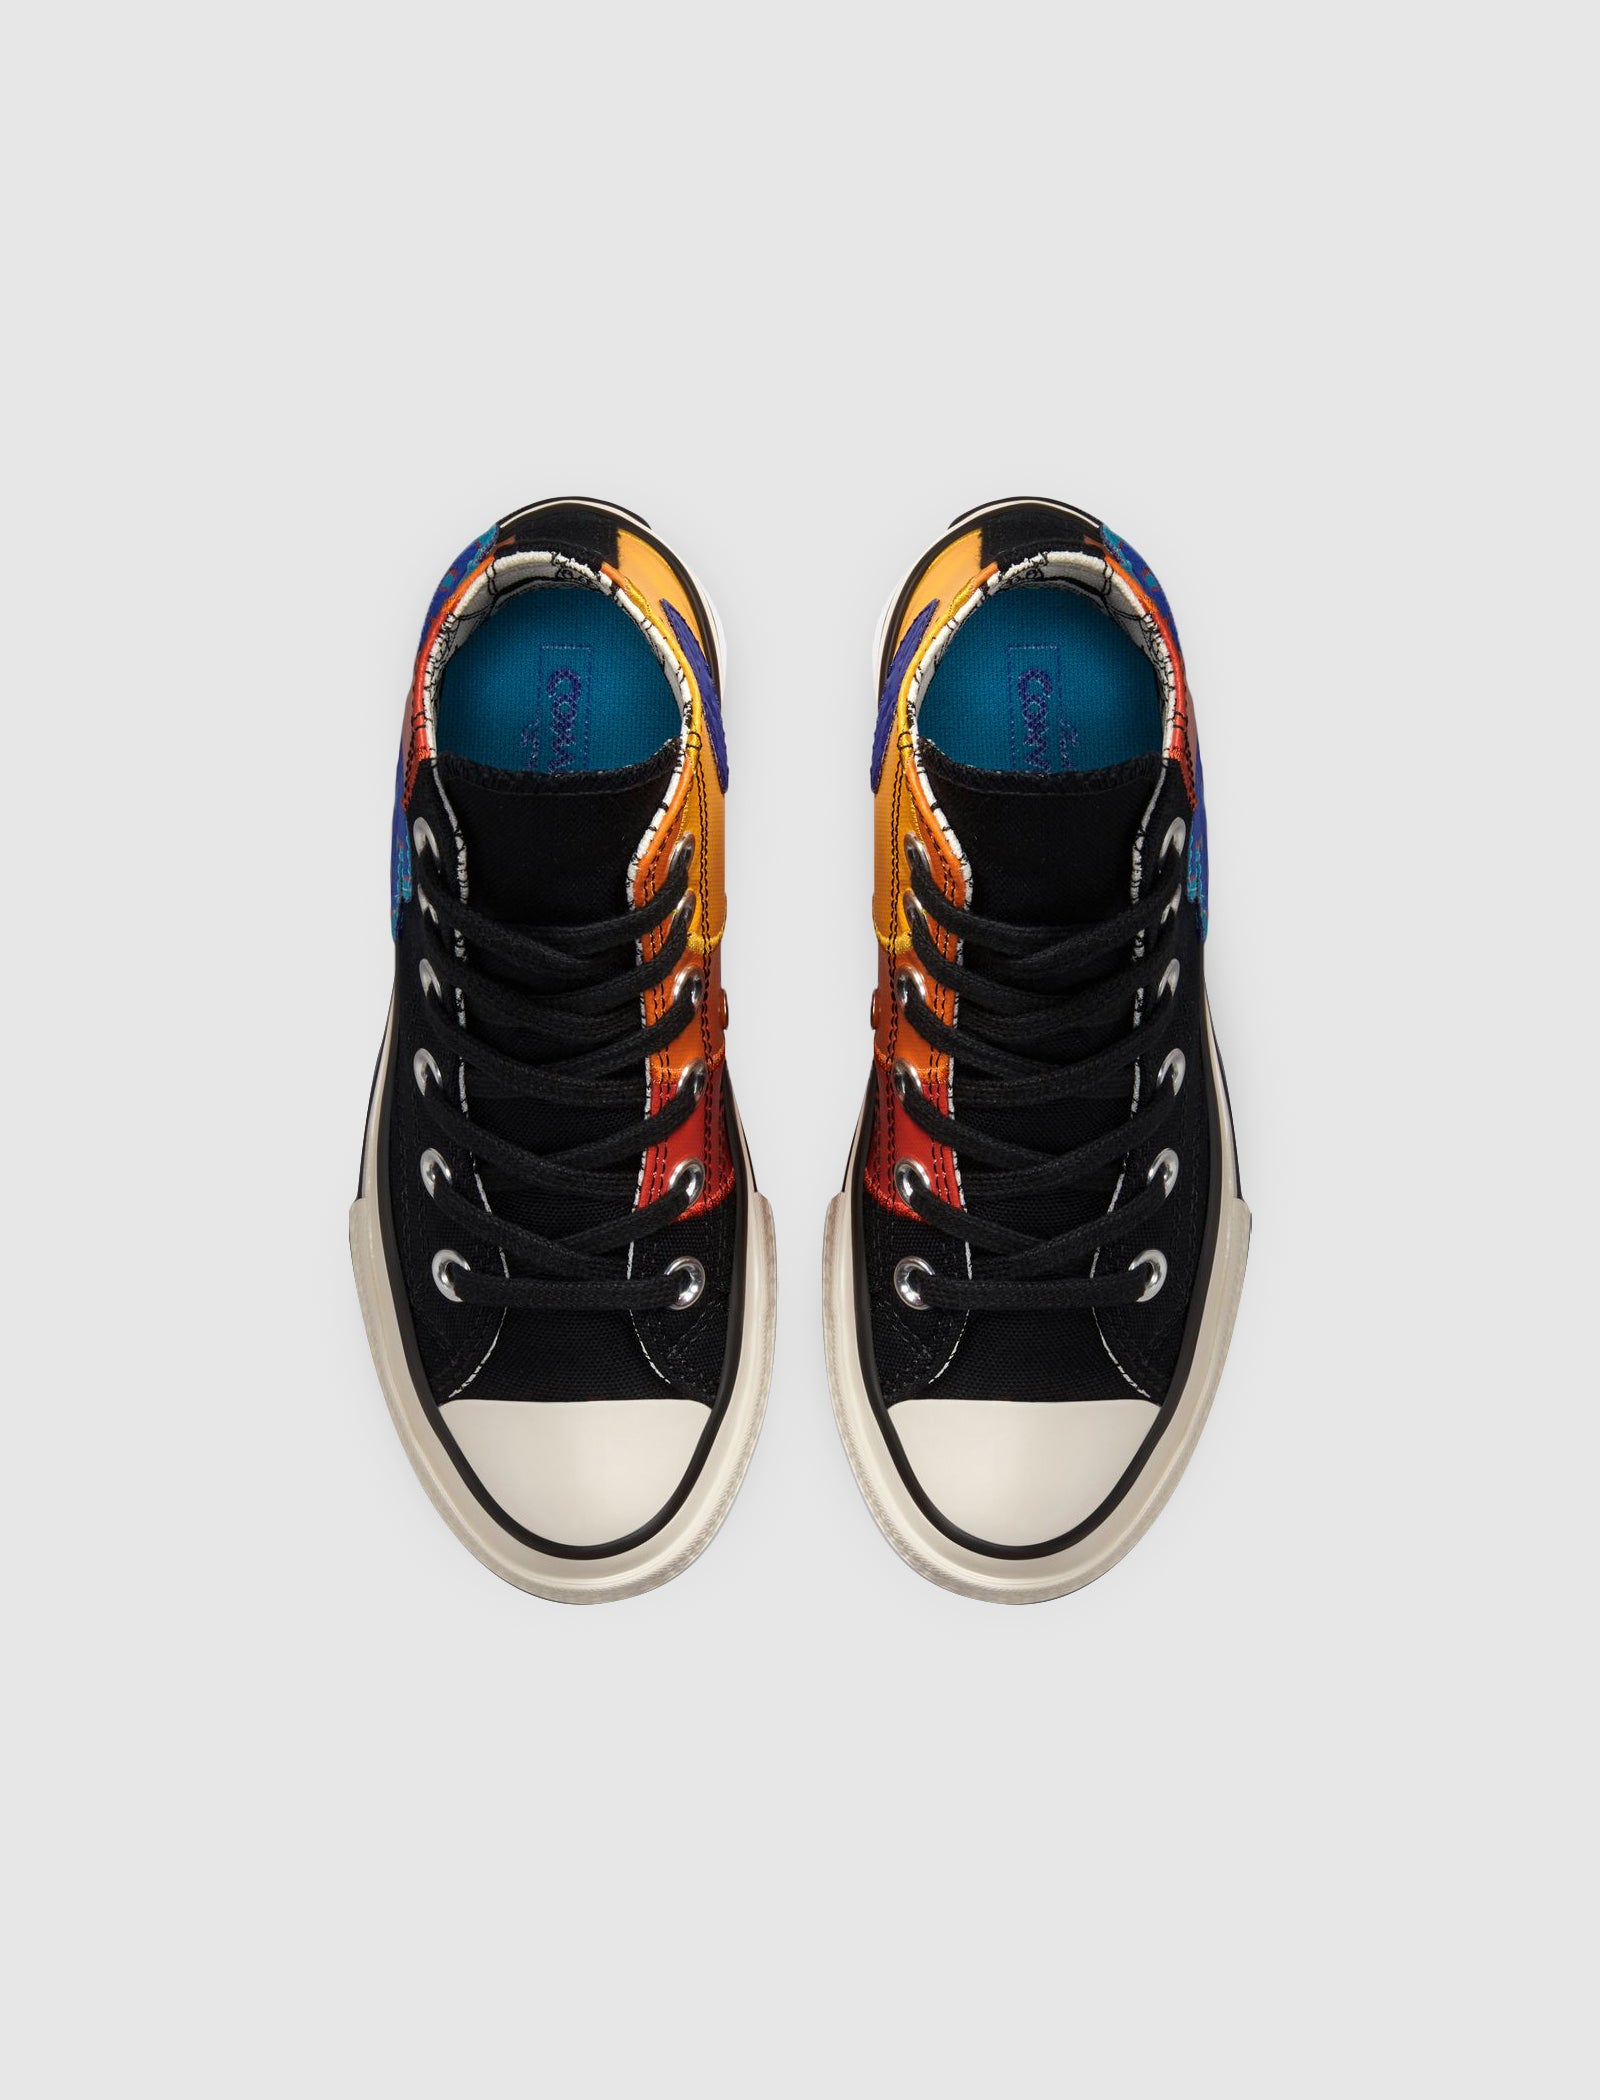 SPACE JAM CHUCK TAYLOR 70 "TUNE SQUAD" PS